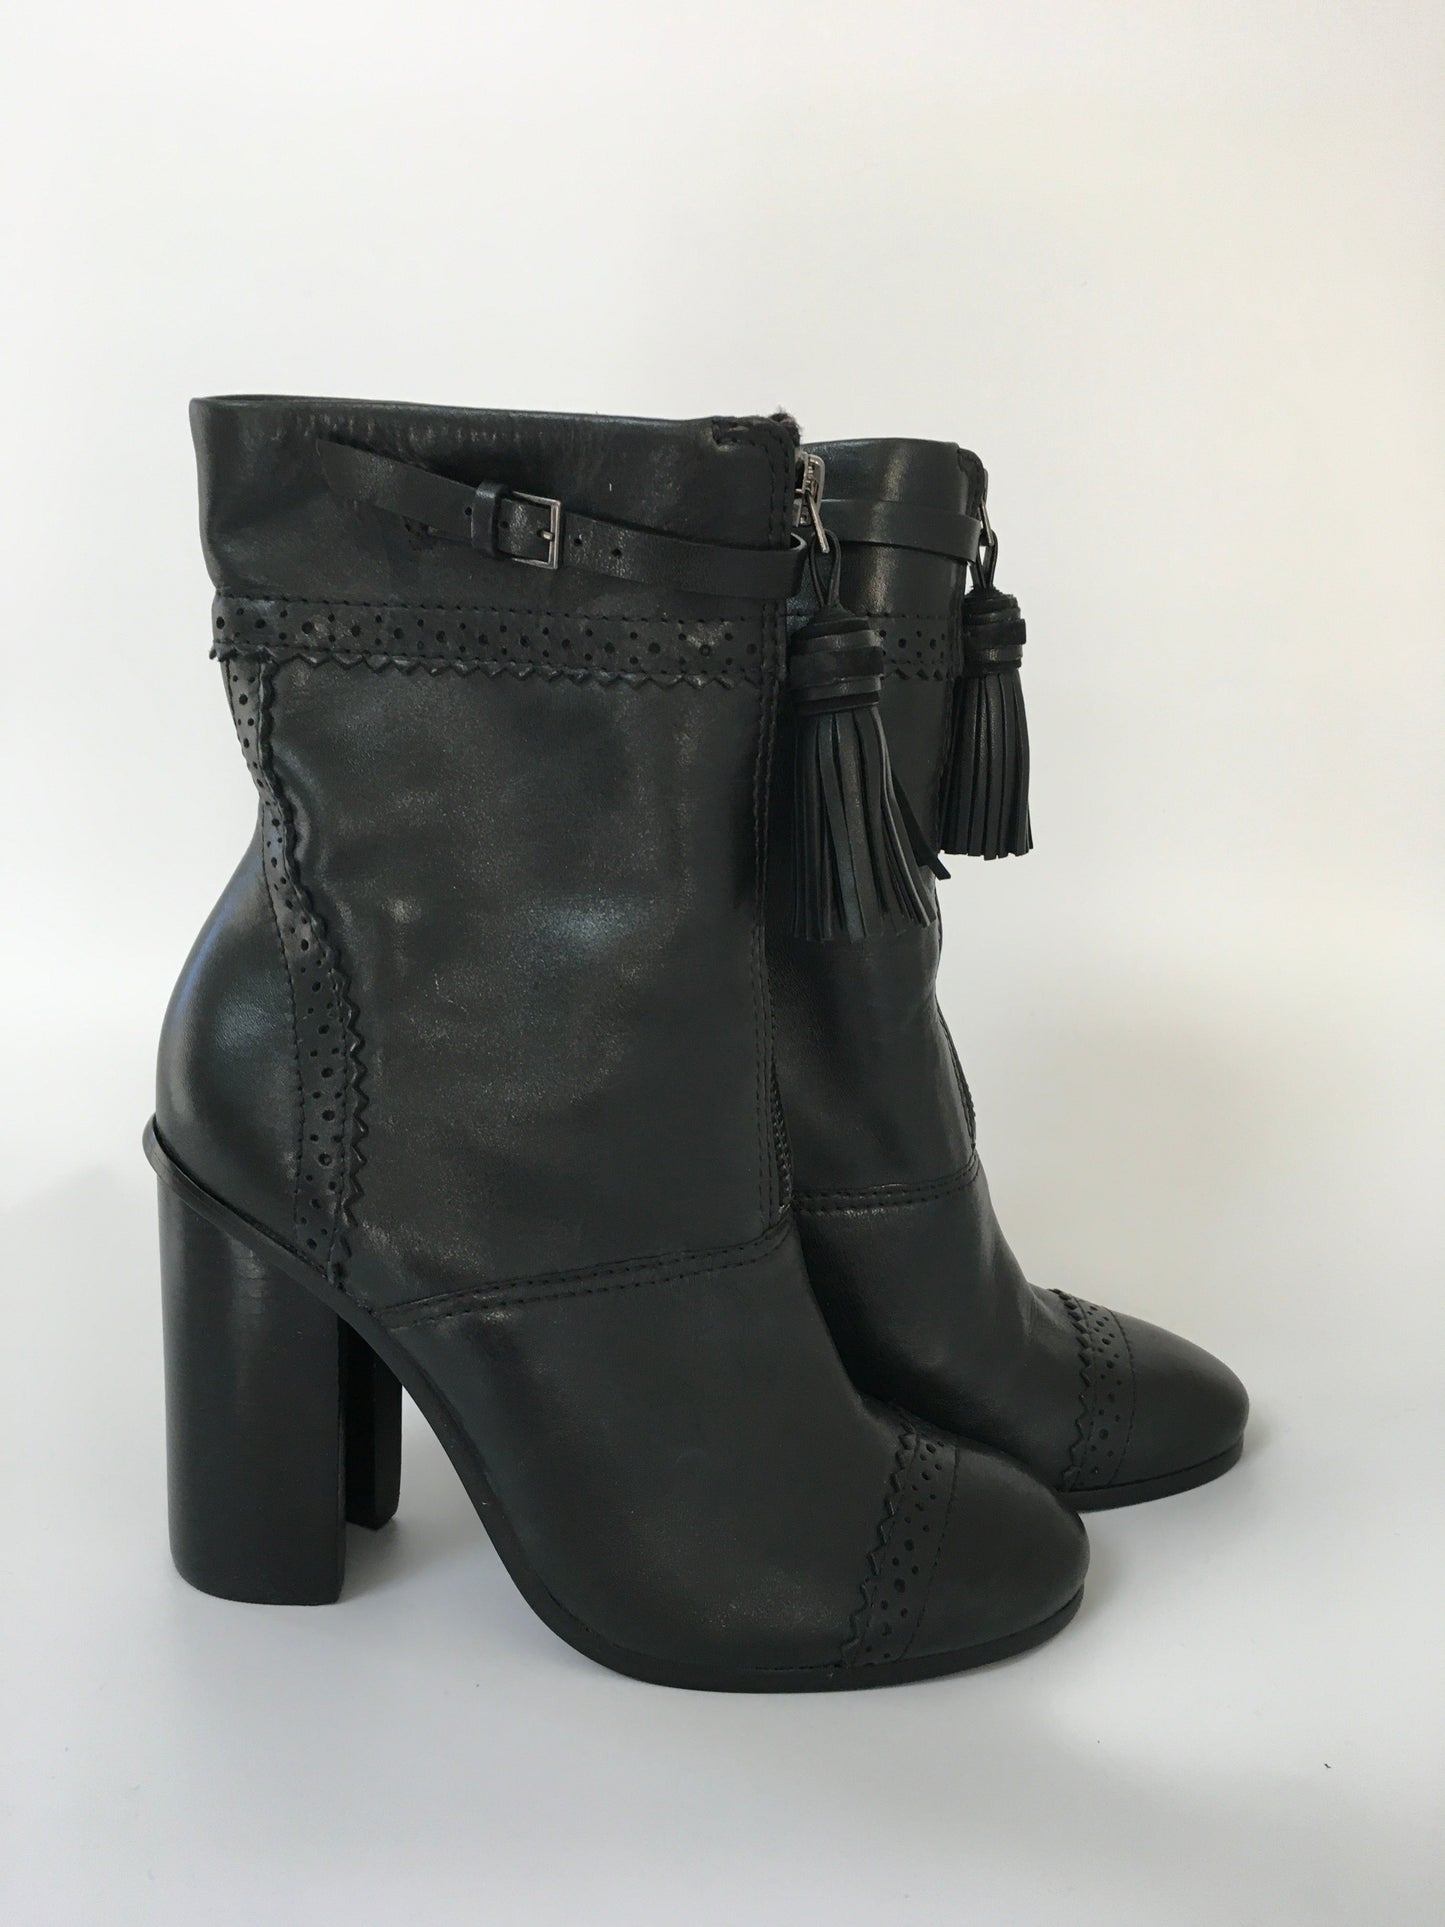 Boots Leather By Tory Burch  Size: 5.5